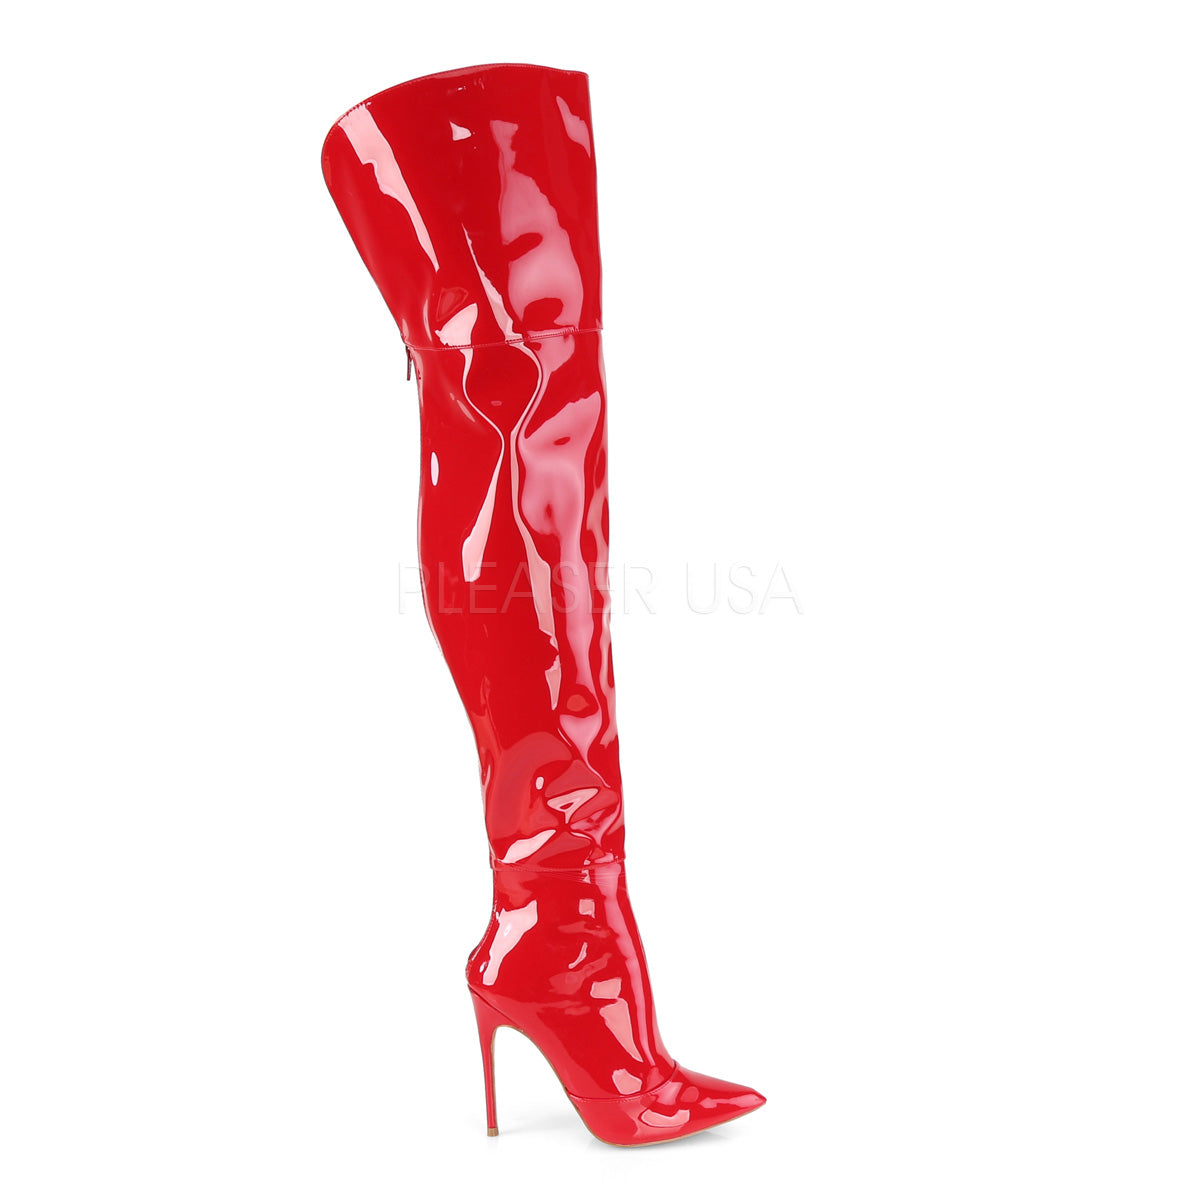 5 Inch Heel COURTLY-3012 Red Pat